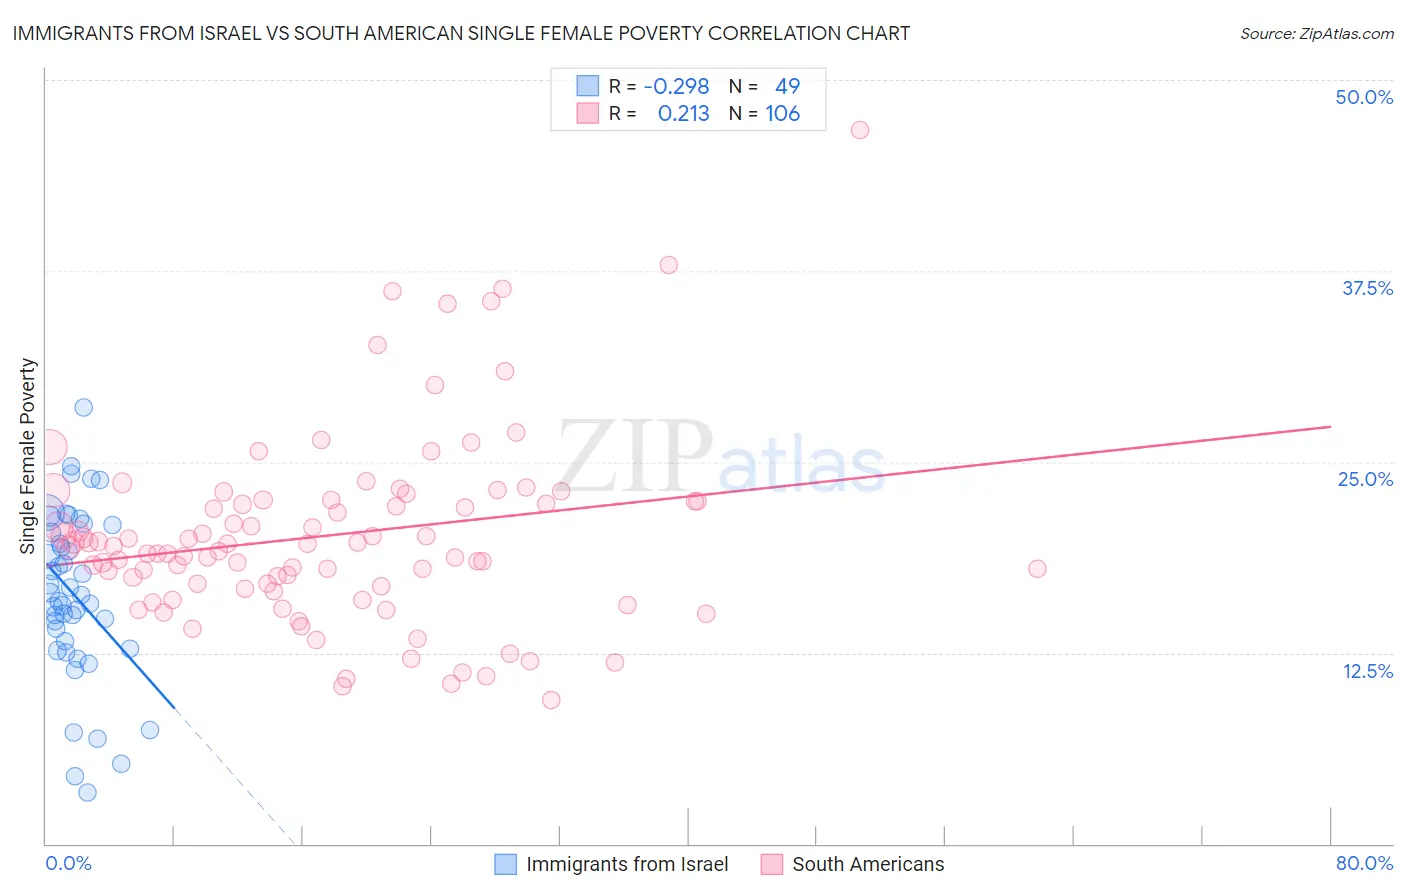 Immigrants from Israel vs South American Single Female Poverty